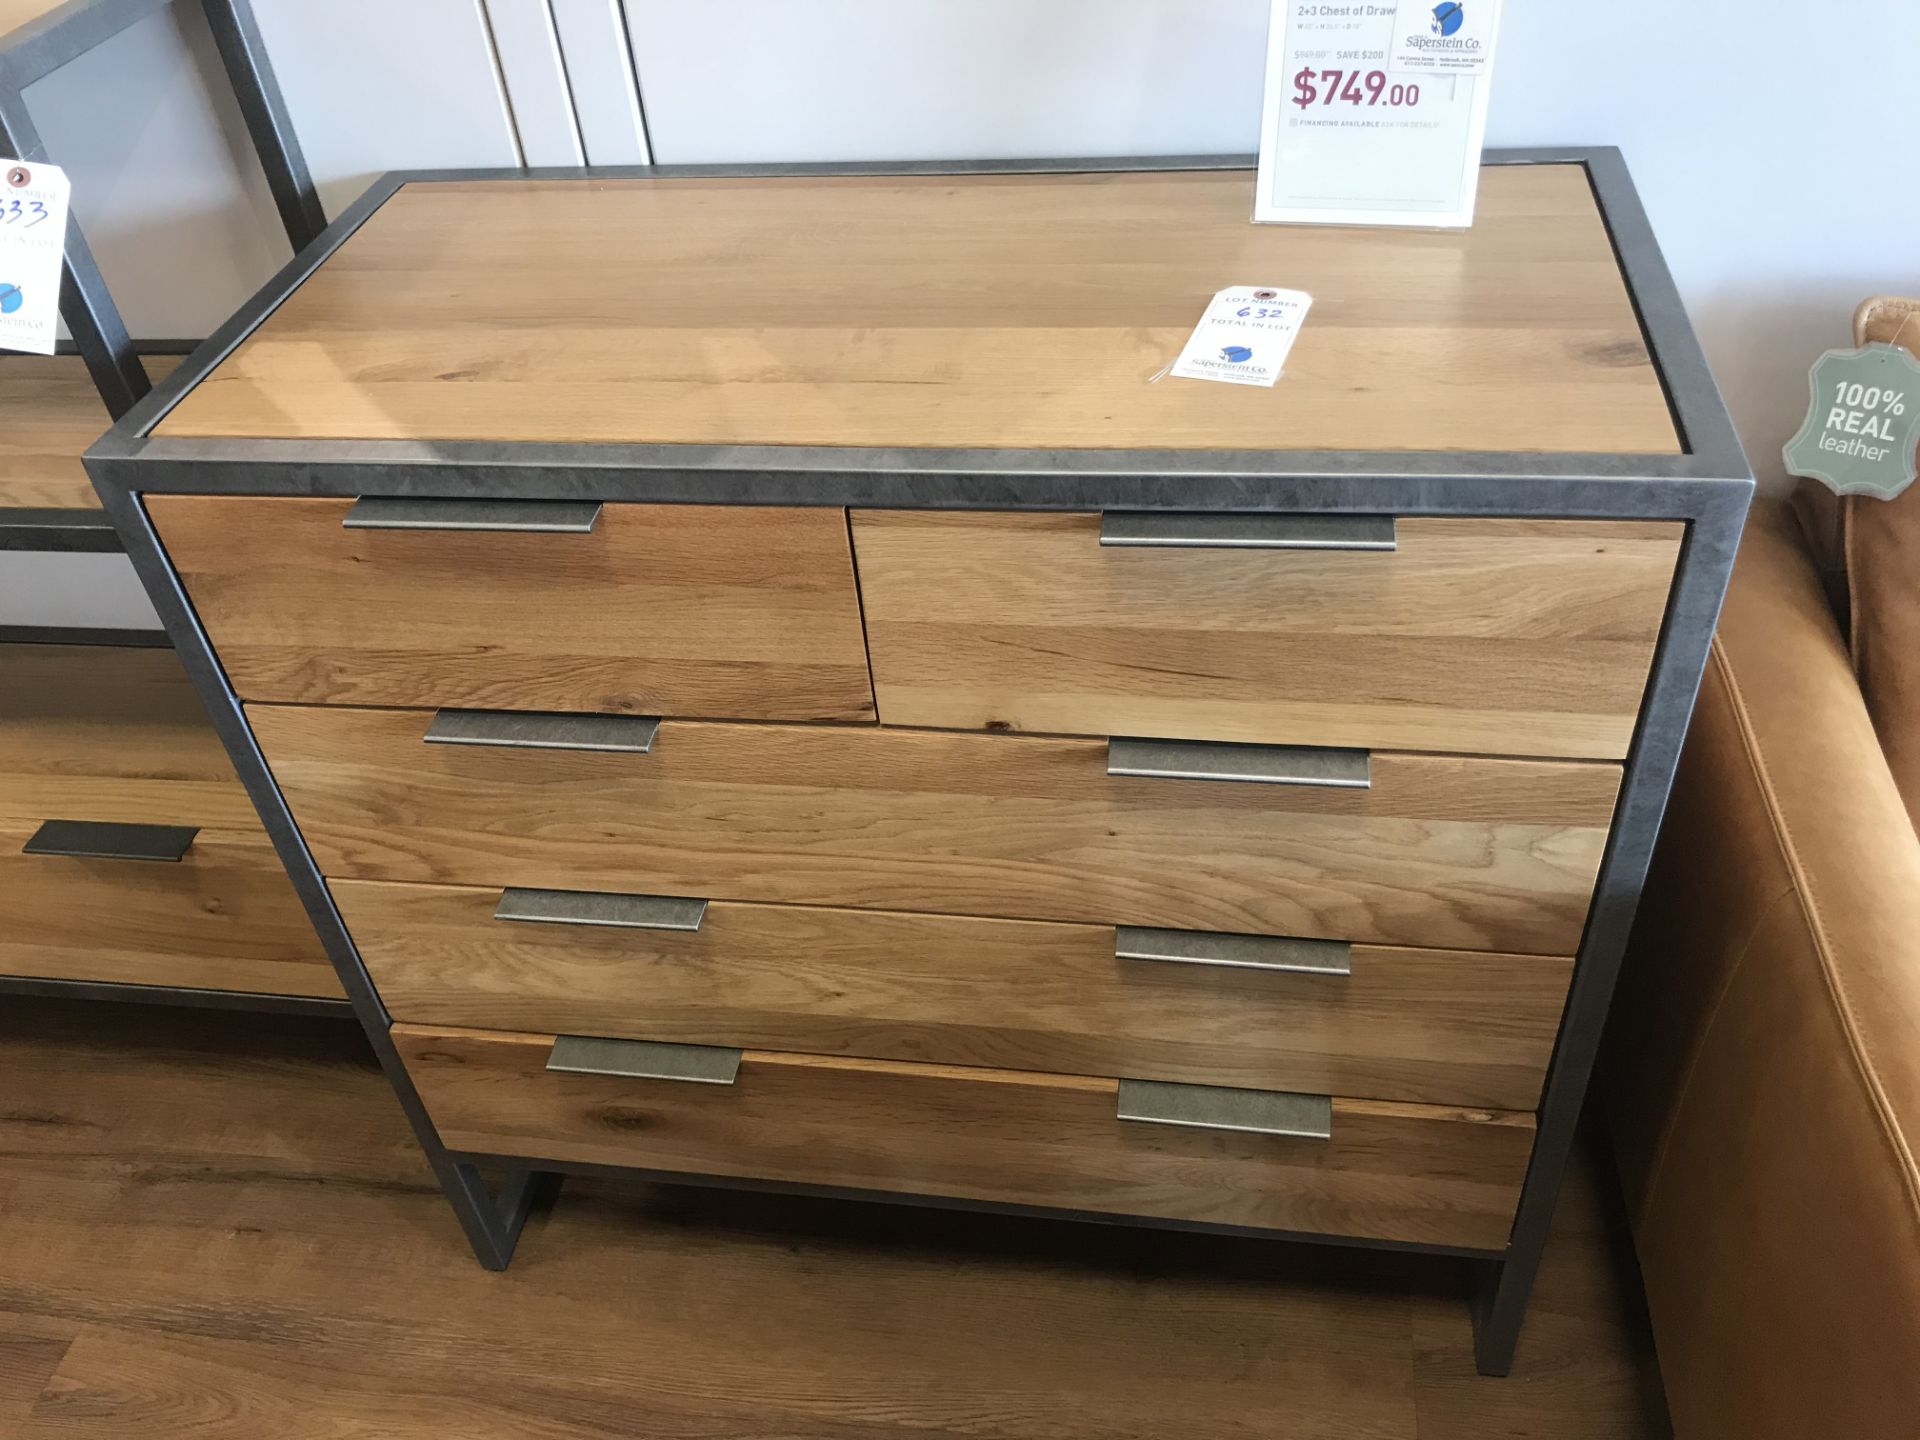 2+3 Chest of Drawers (Brooklyn) See Picture For Dimensions and Product Info